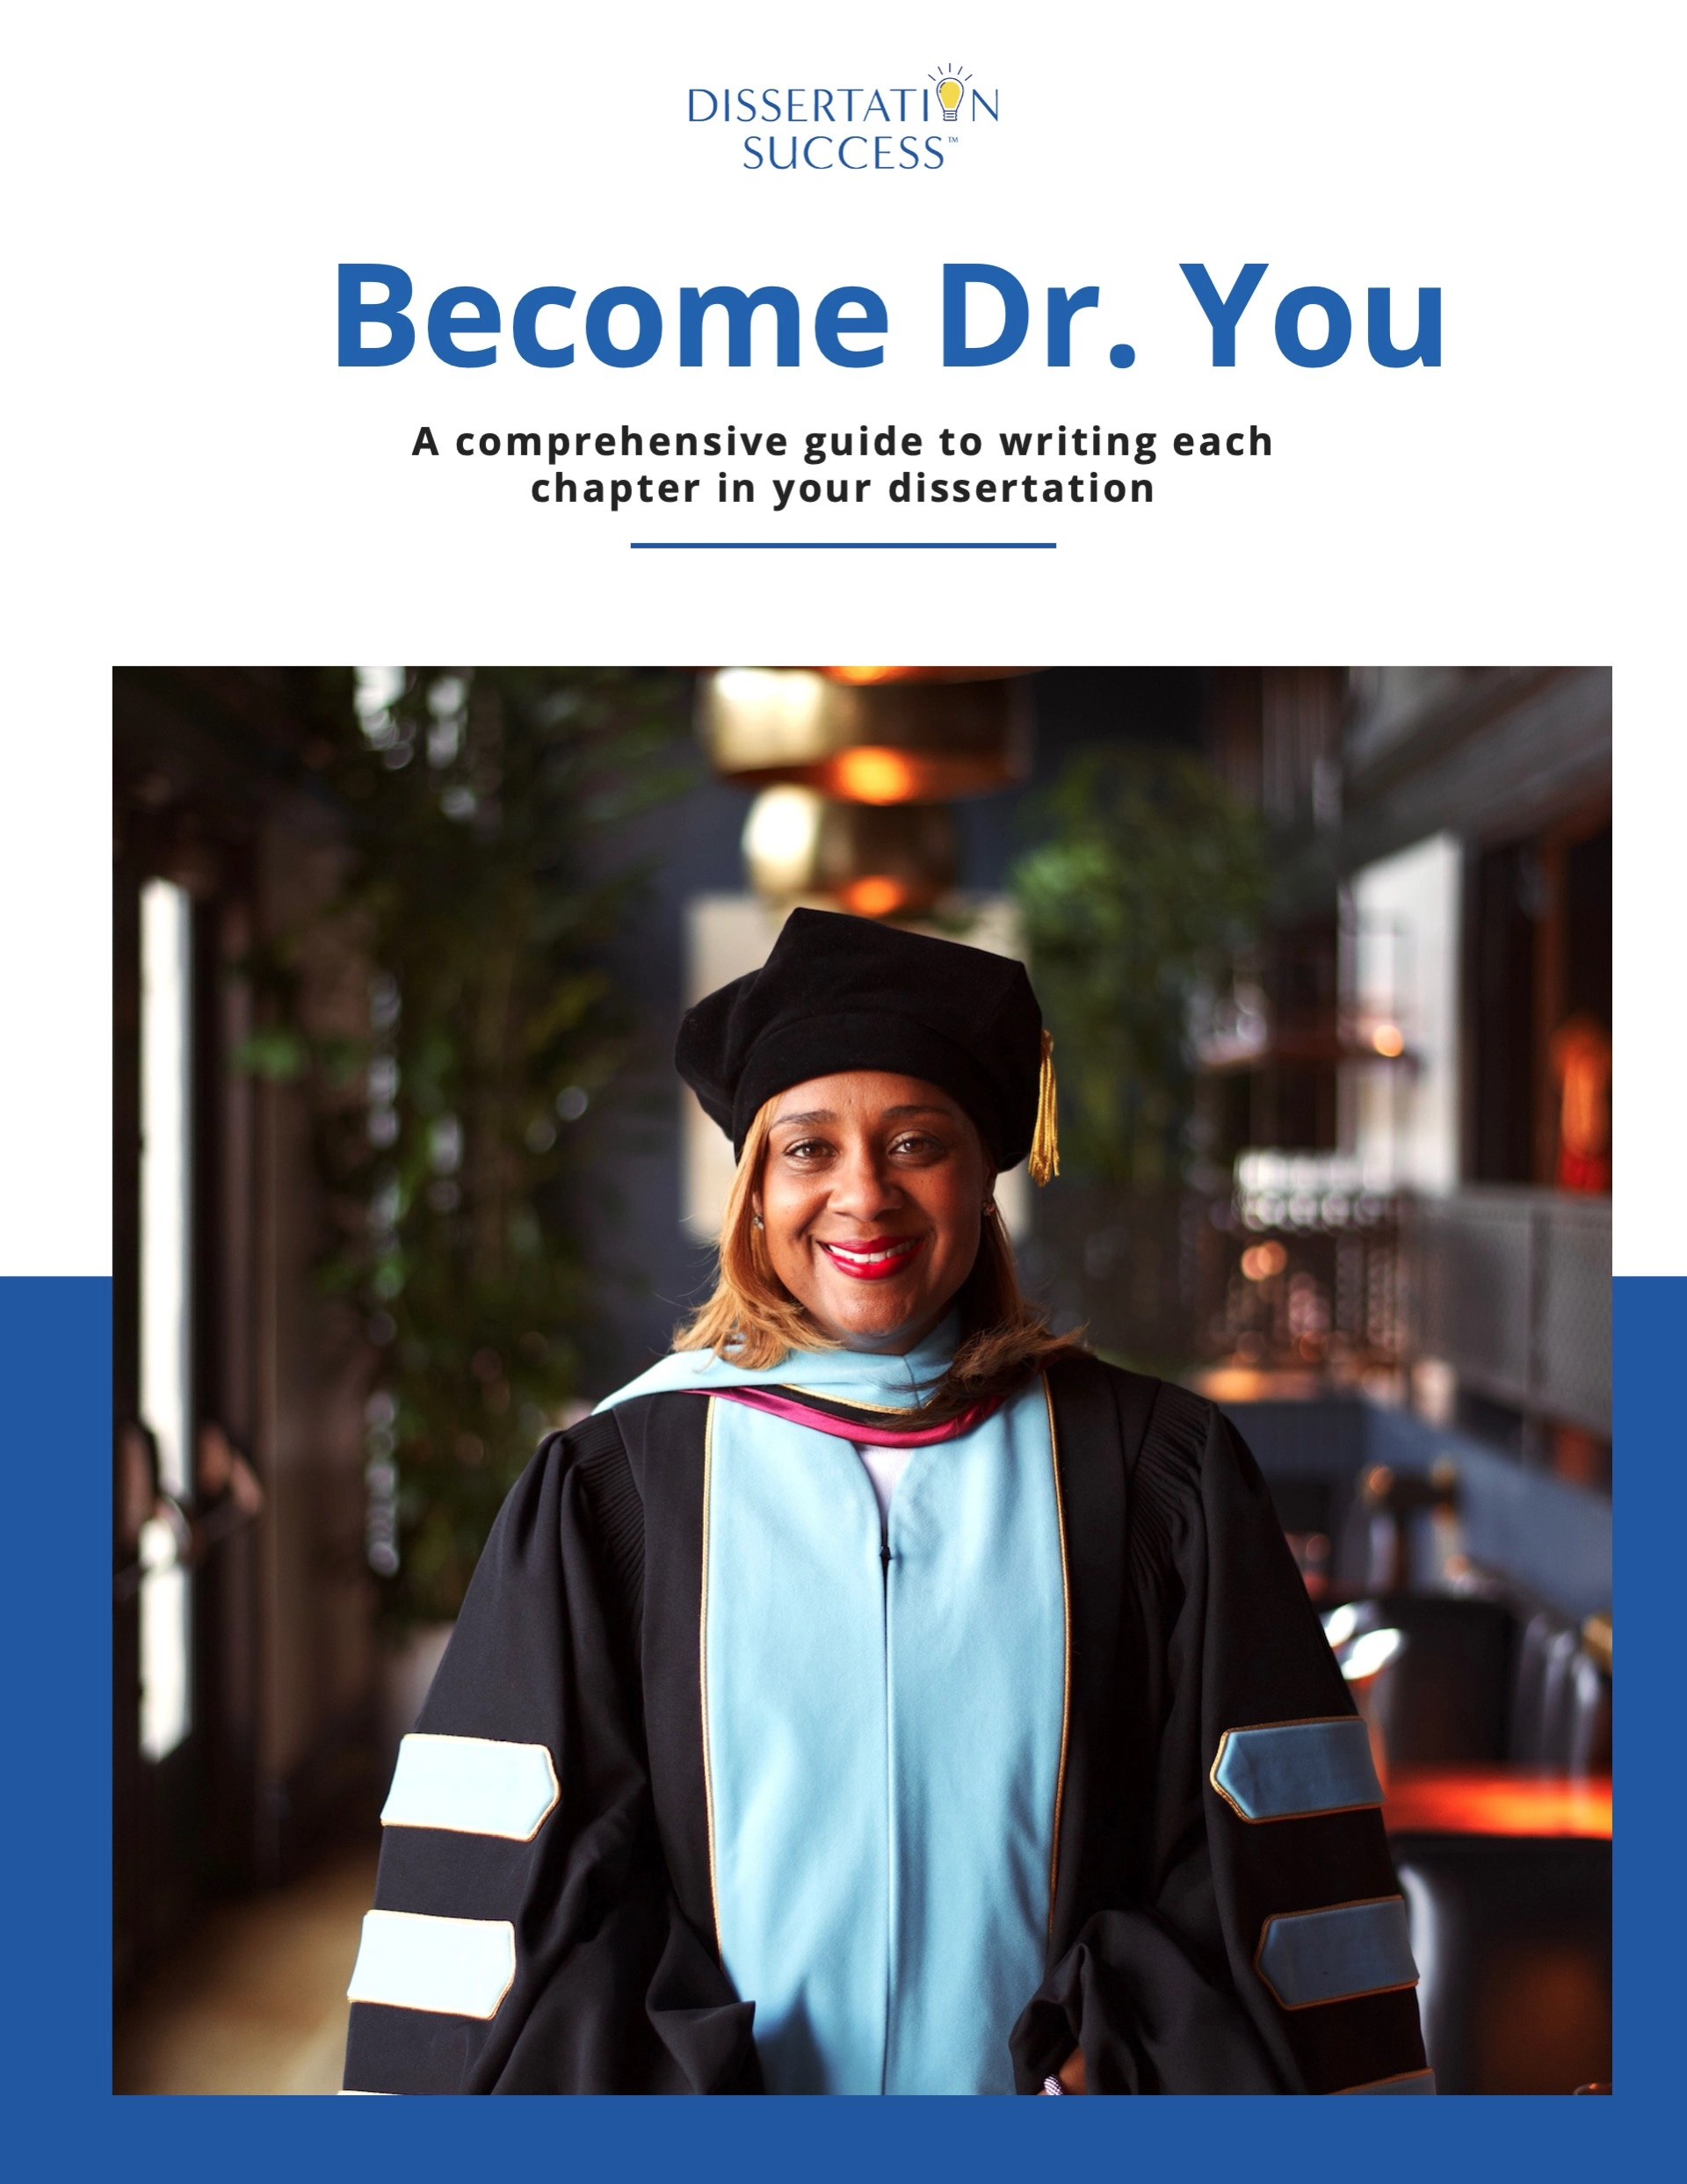 Become Dr. You - A Comprehensive Guide & Worsksheet to Writing Chapters in a Dissertation